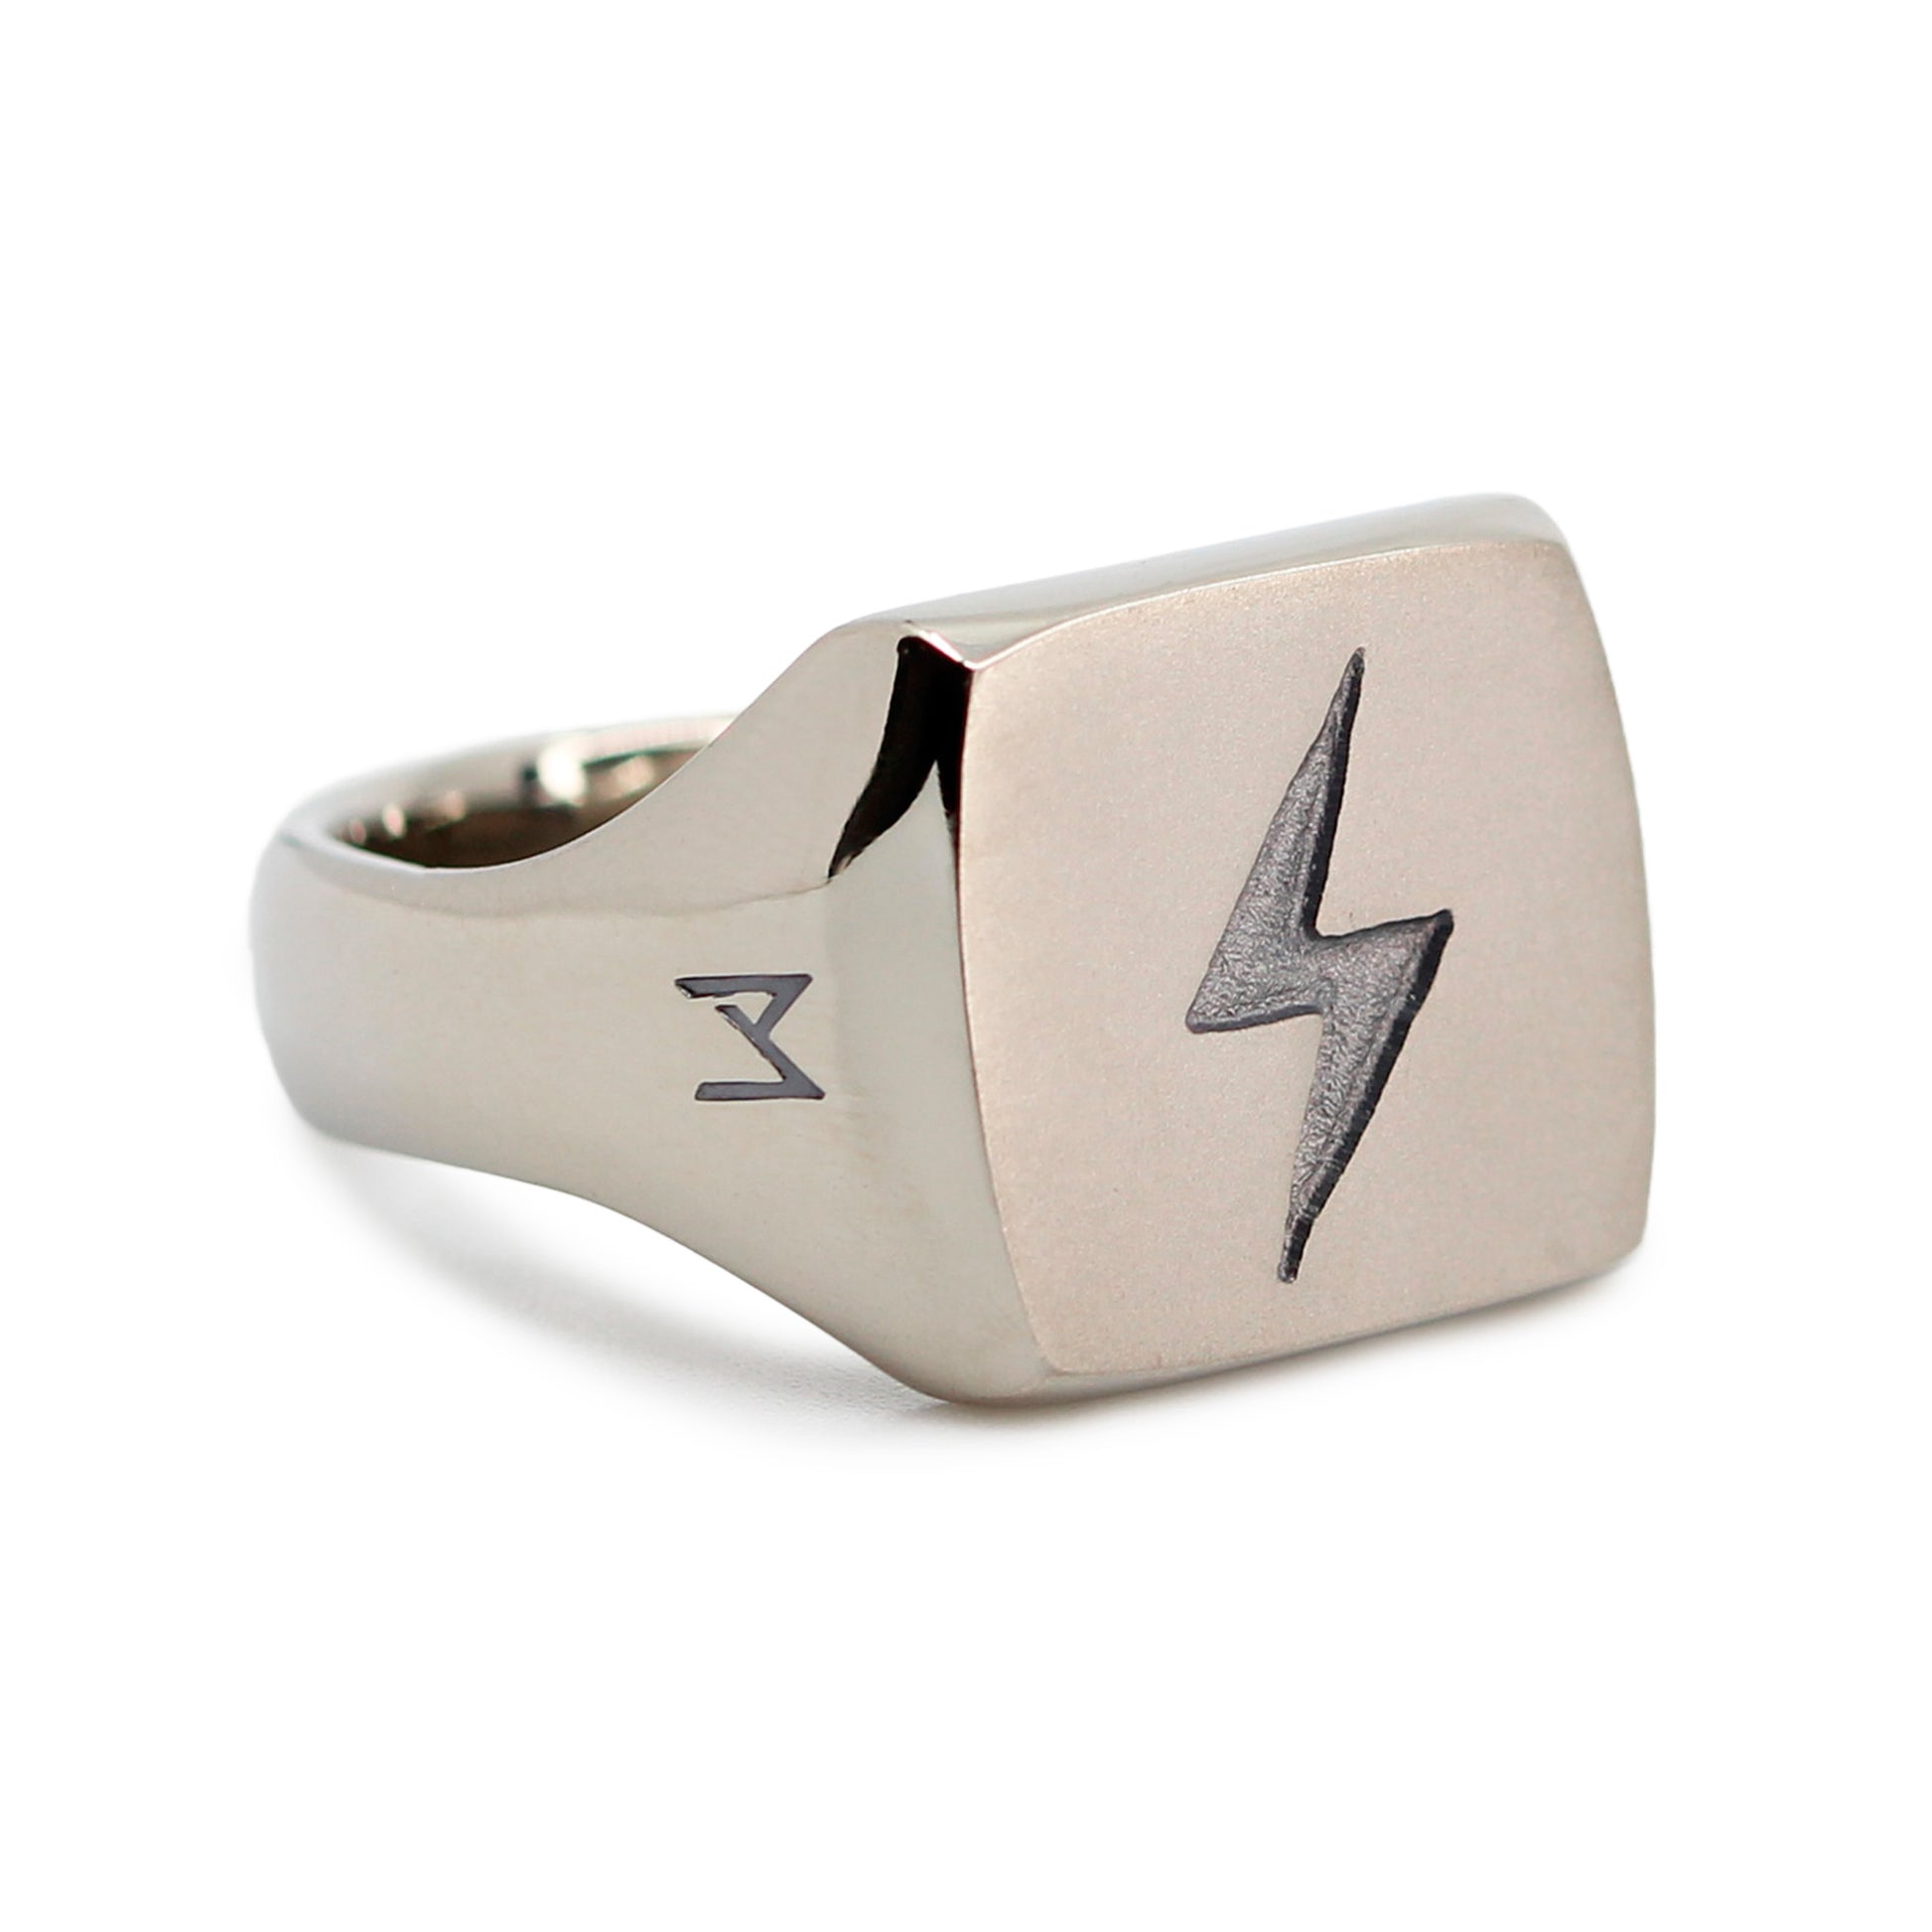 Single silver-colored titanium signet ring, 15x15 mm wide surface with an engraved lightning bolt. Image shows corner view of the ring